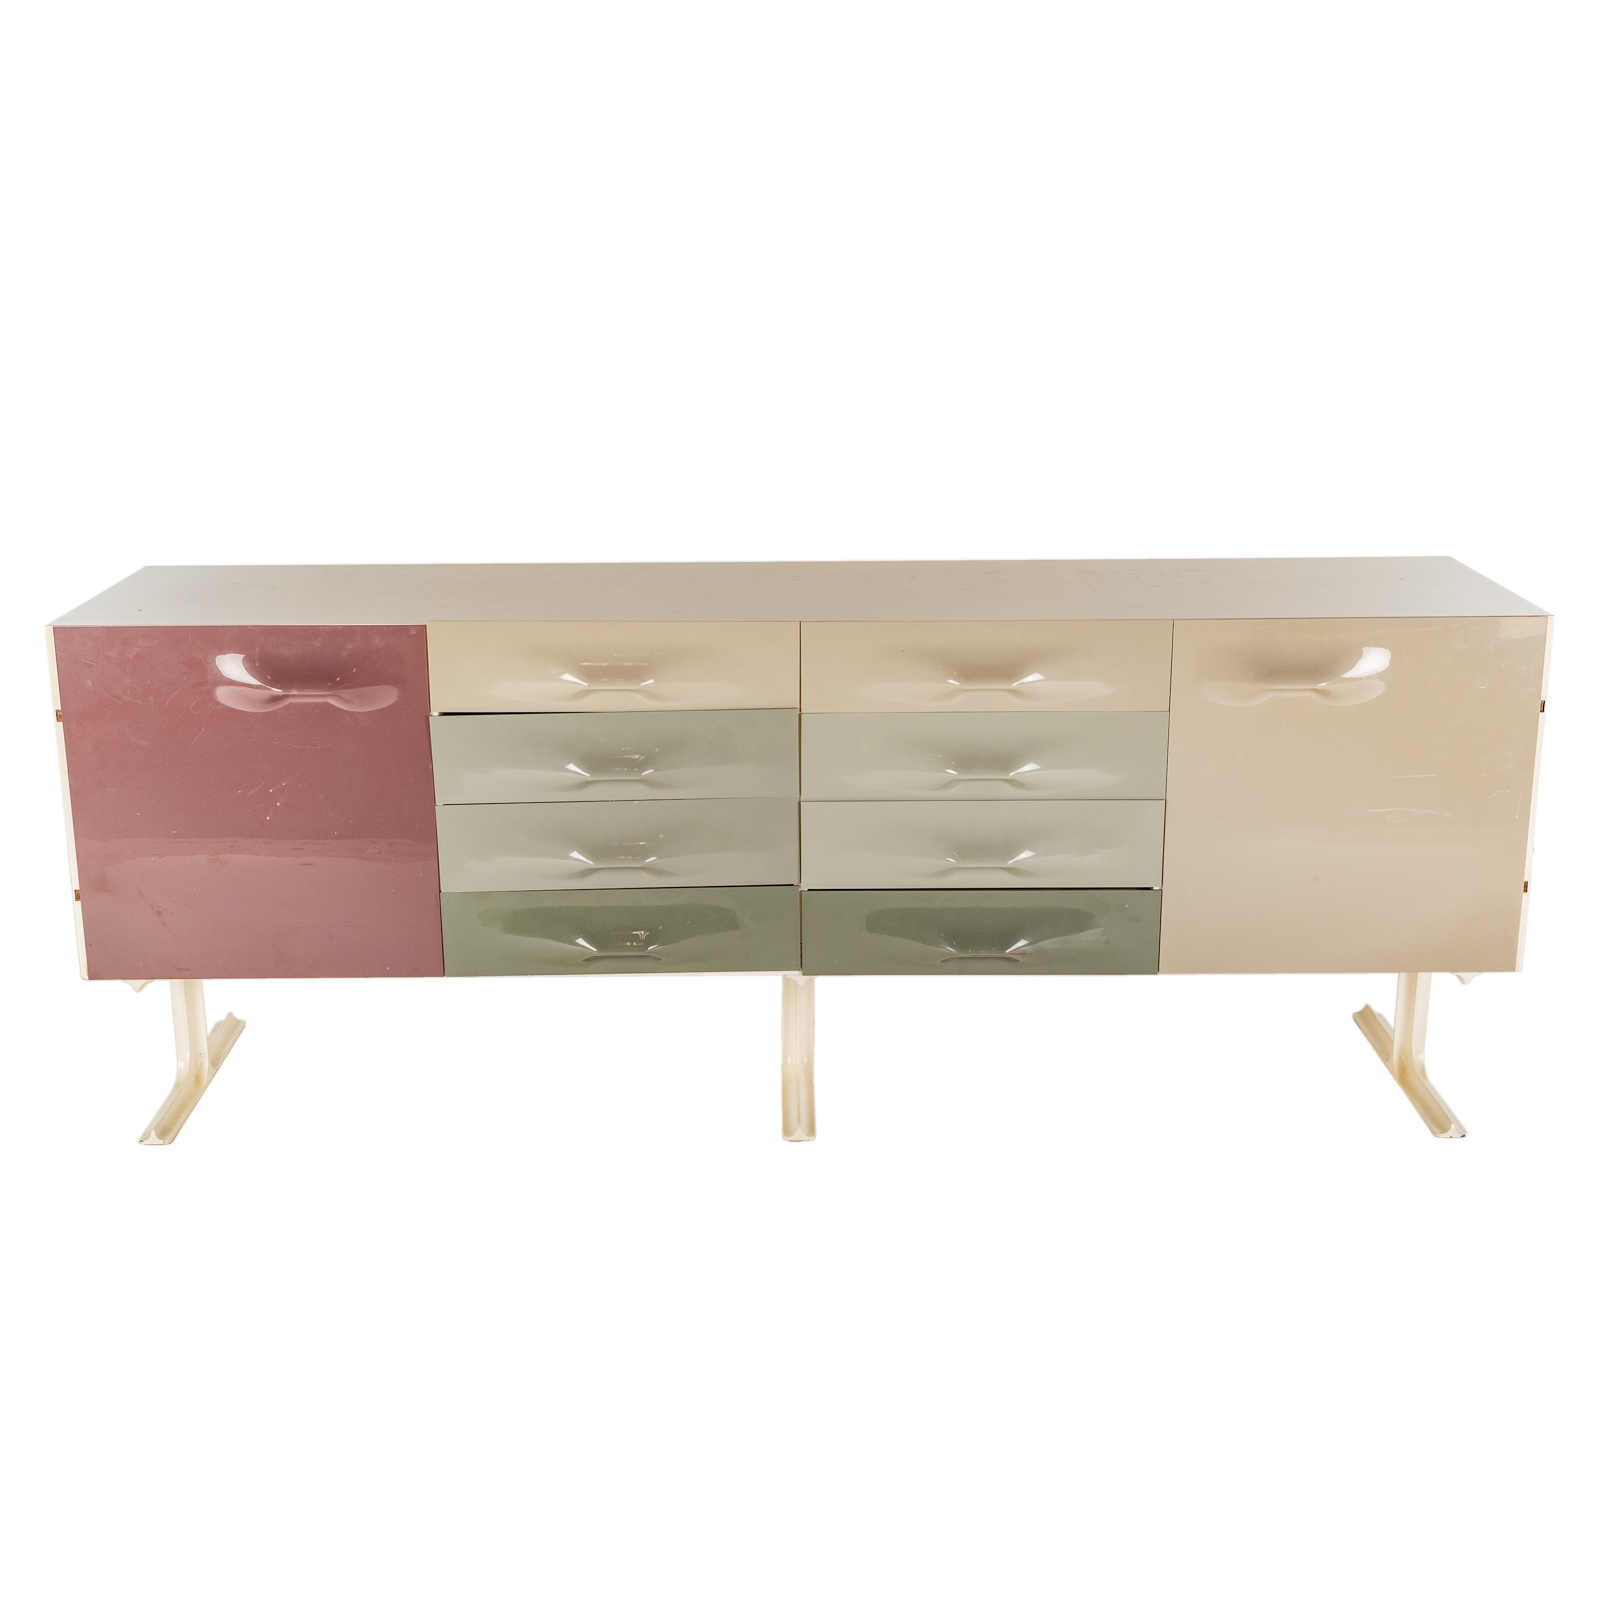 RAYMOND LOEWY STYLE CREDENZA BY 2de8ac